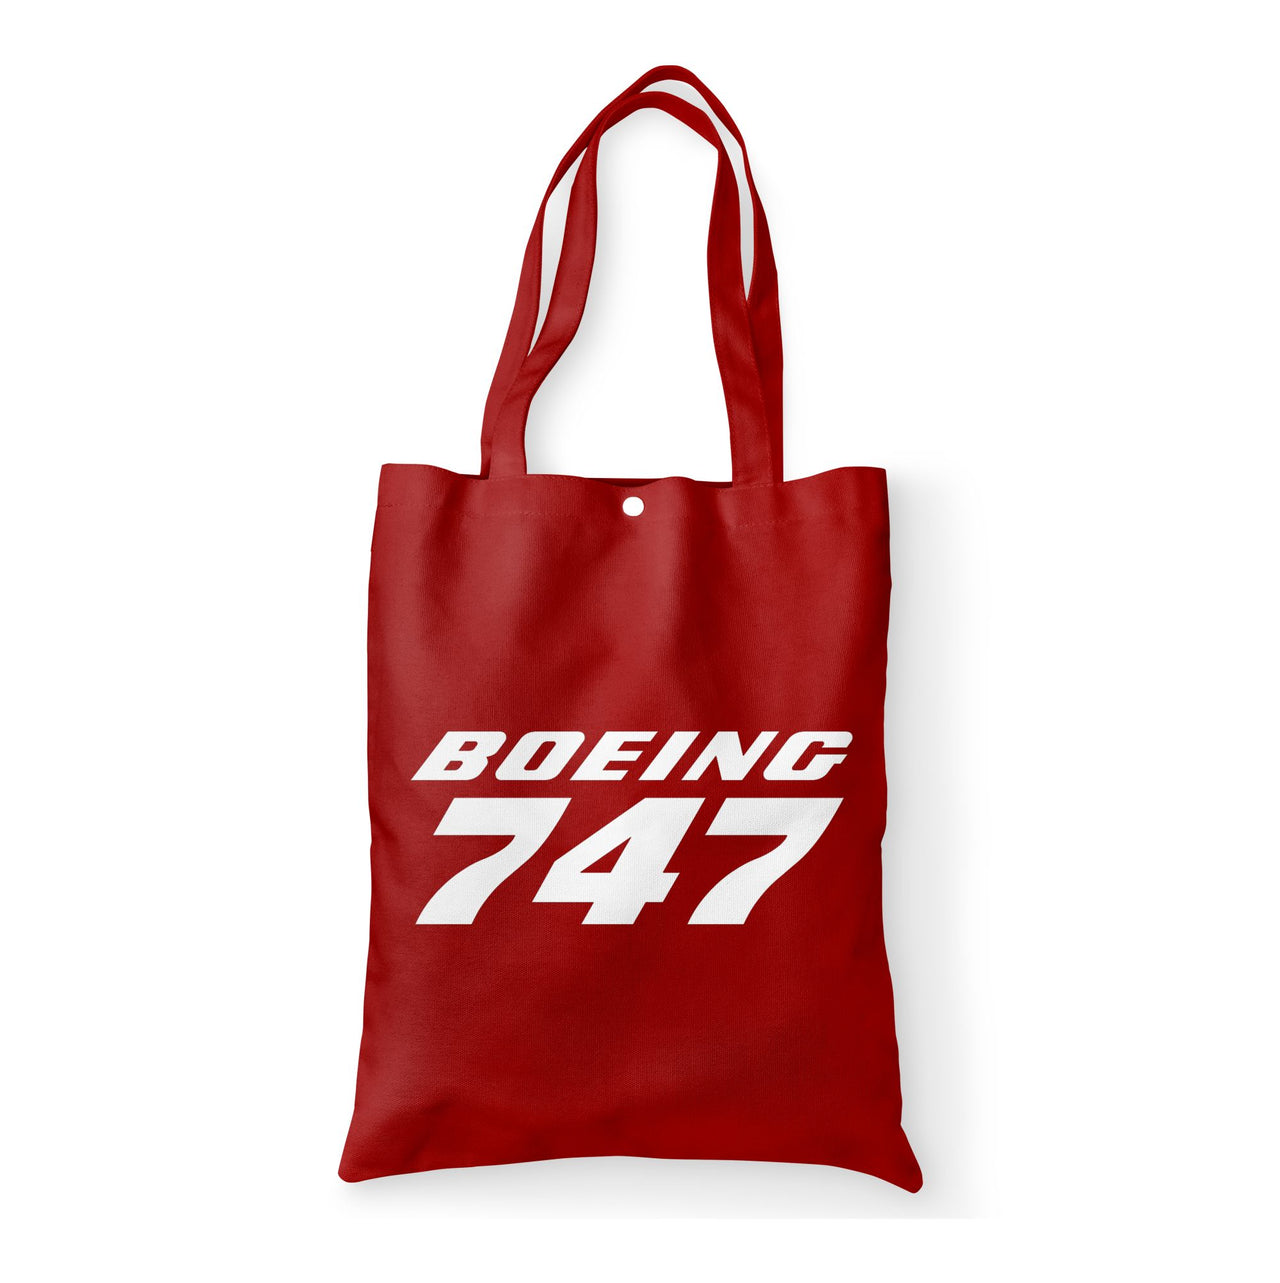 Boeing 747 & Text Designed Tote Bags